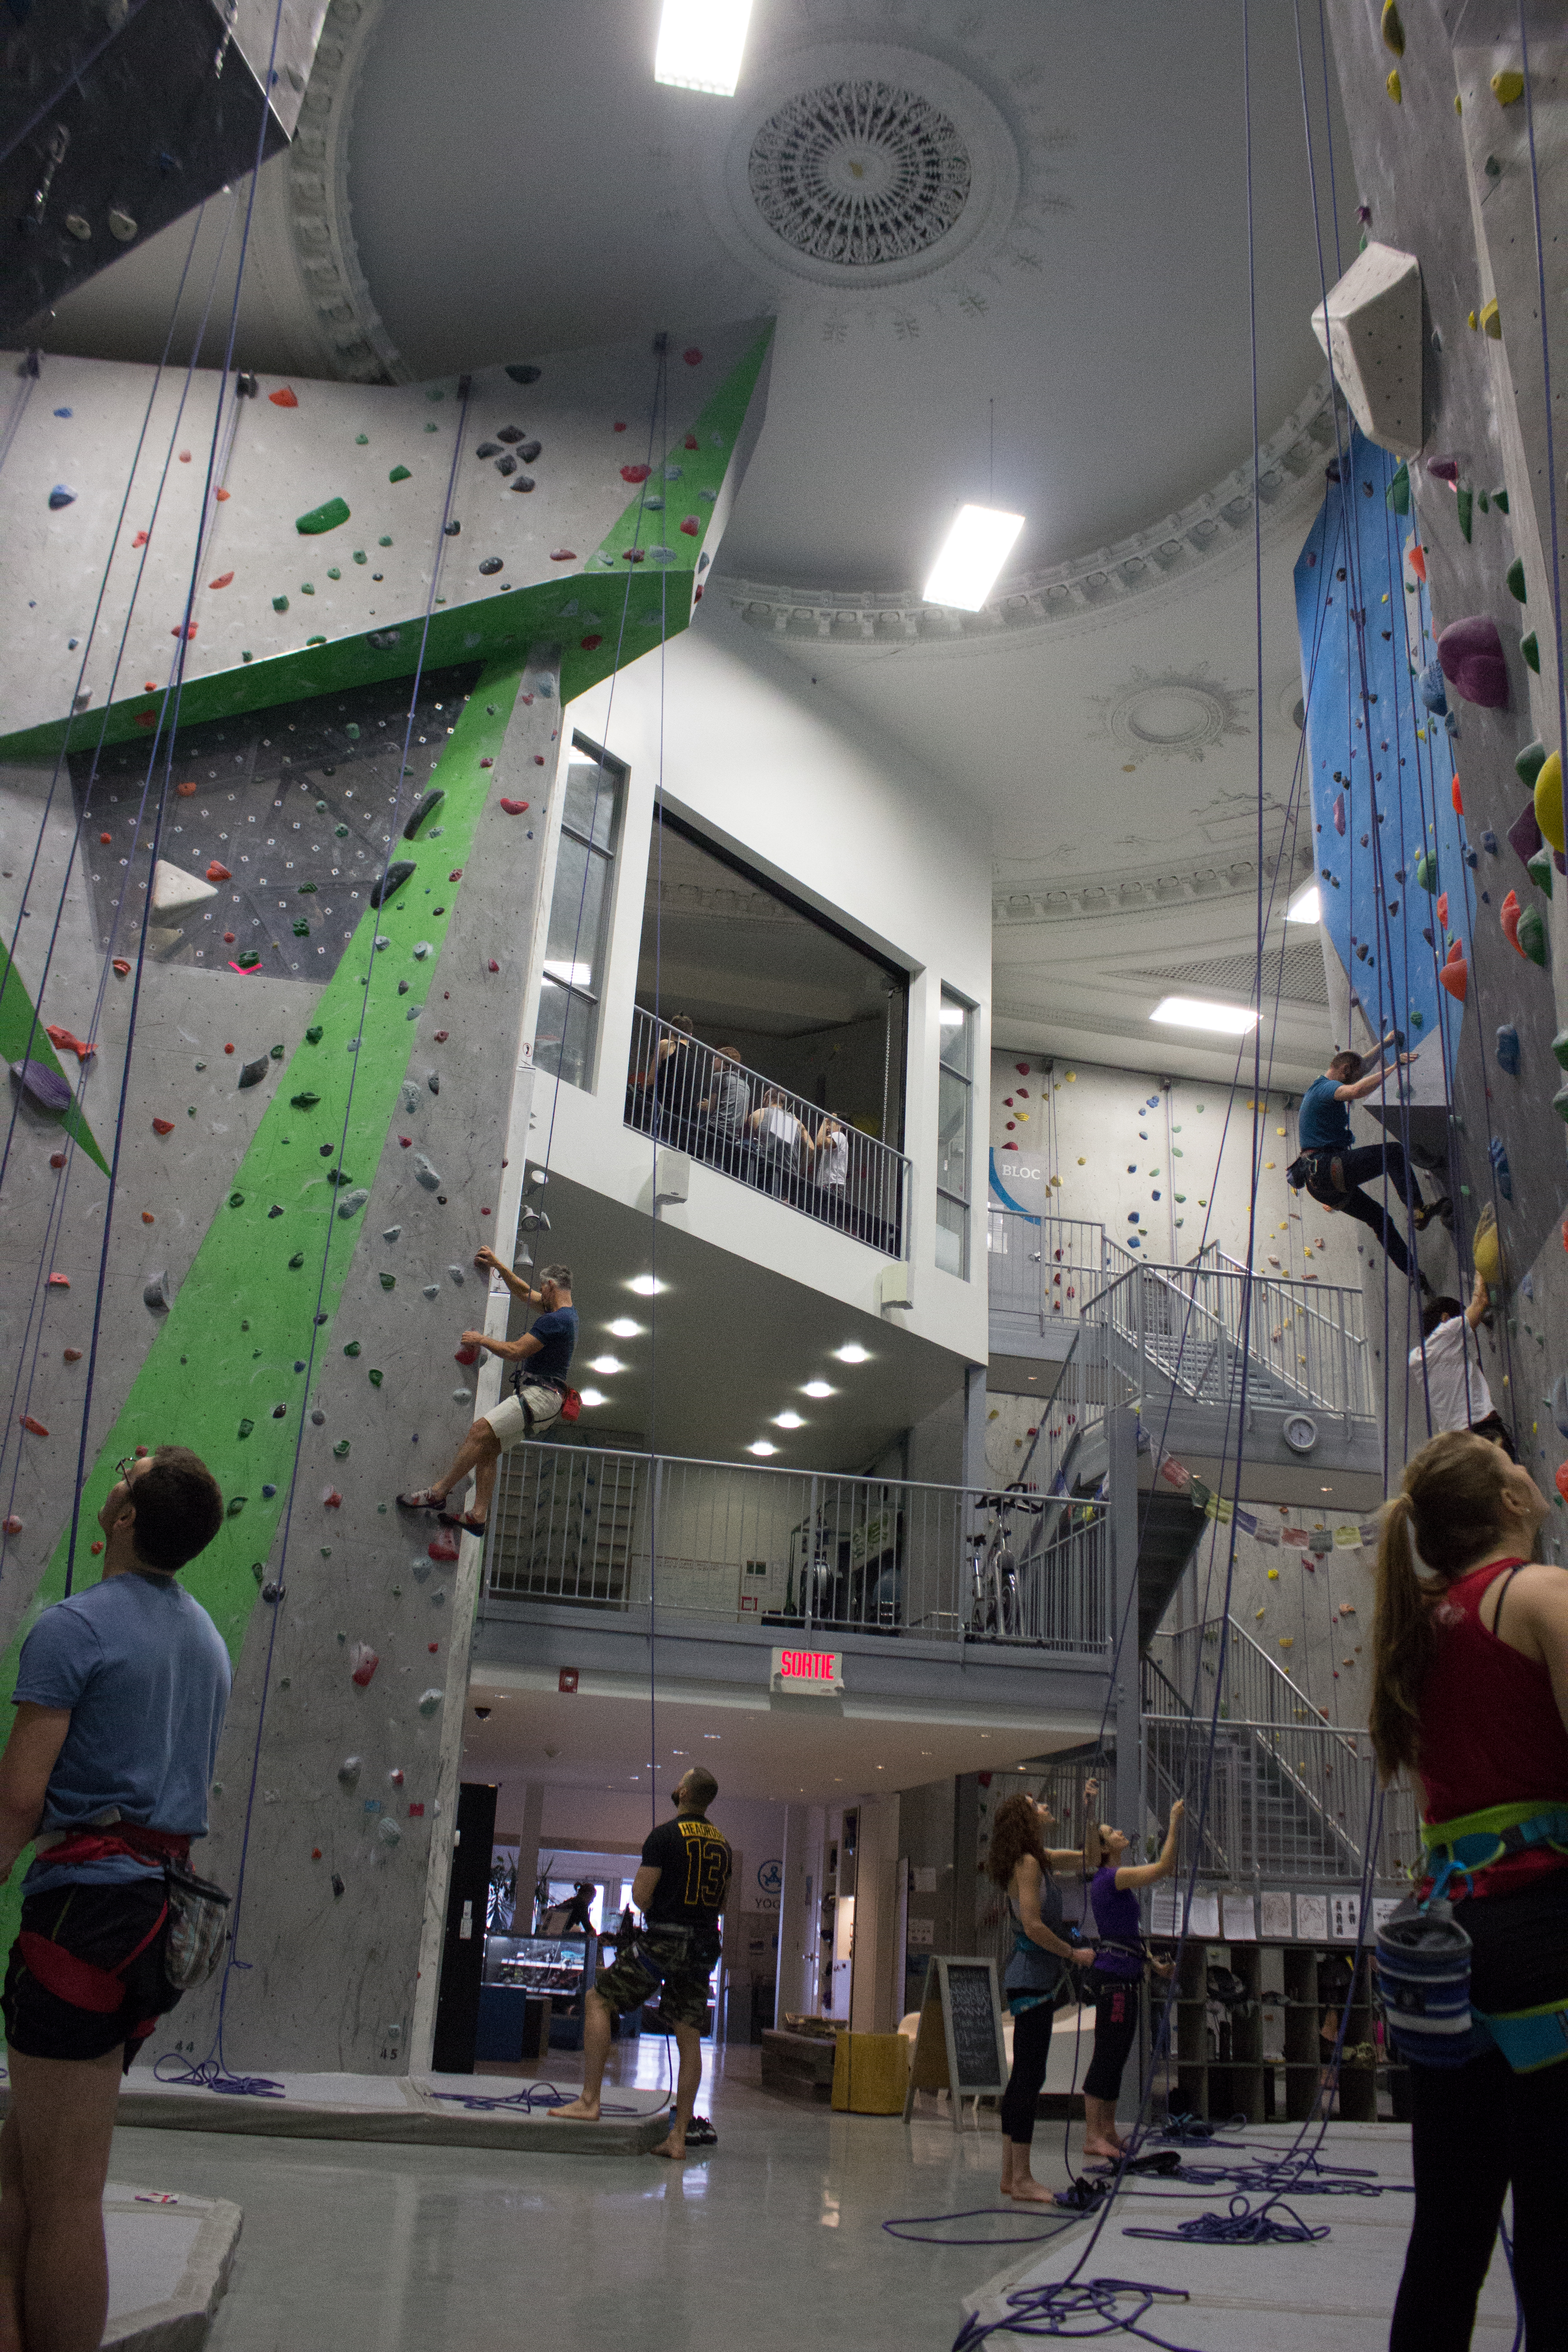 Anxious rock-climbers look up and get ready to climb the wall. Photos by Melissa Martella.